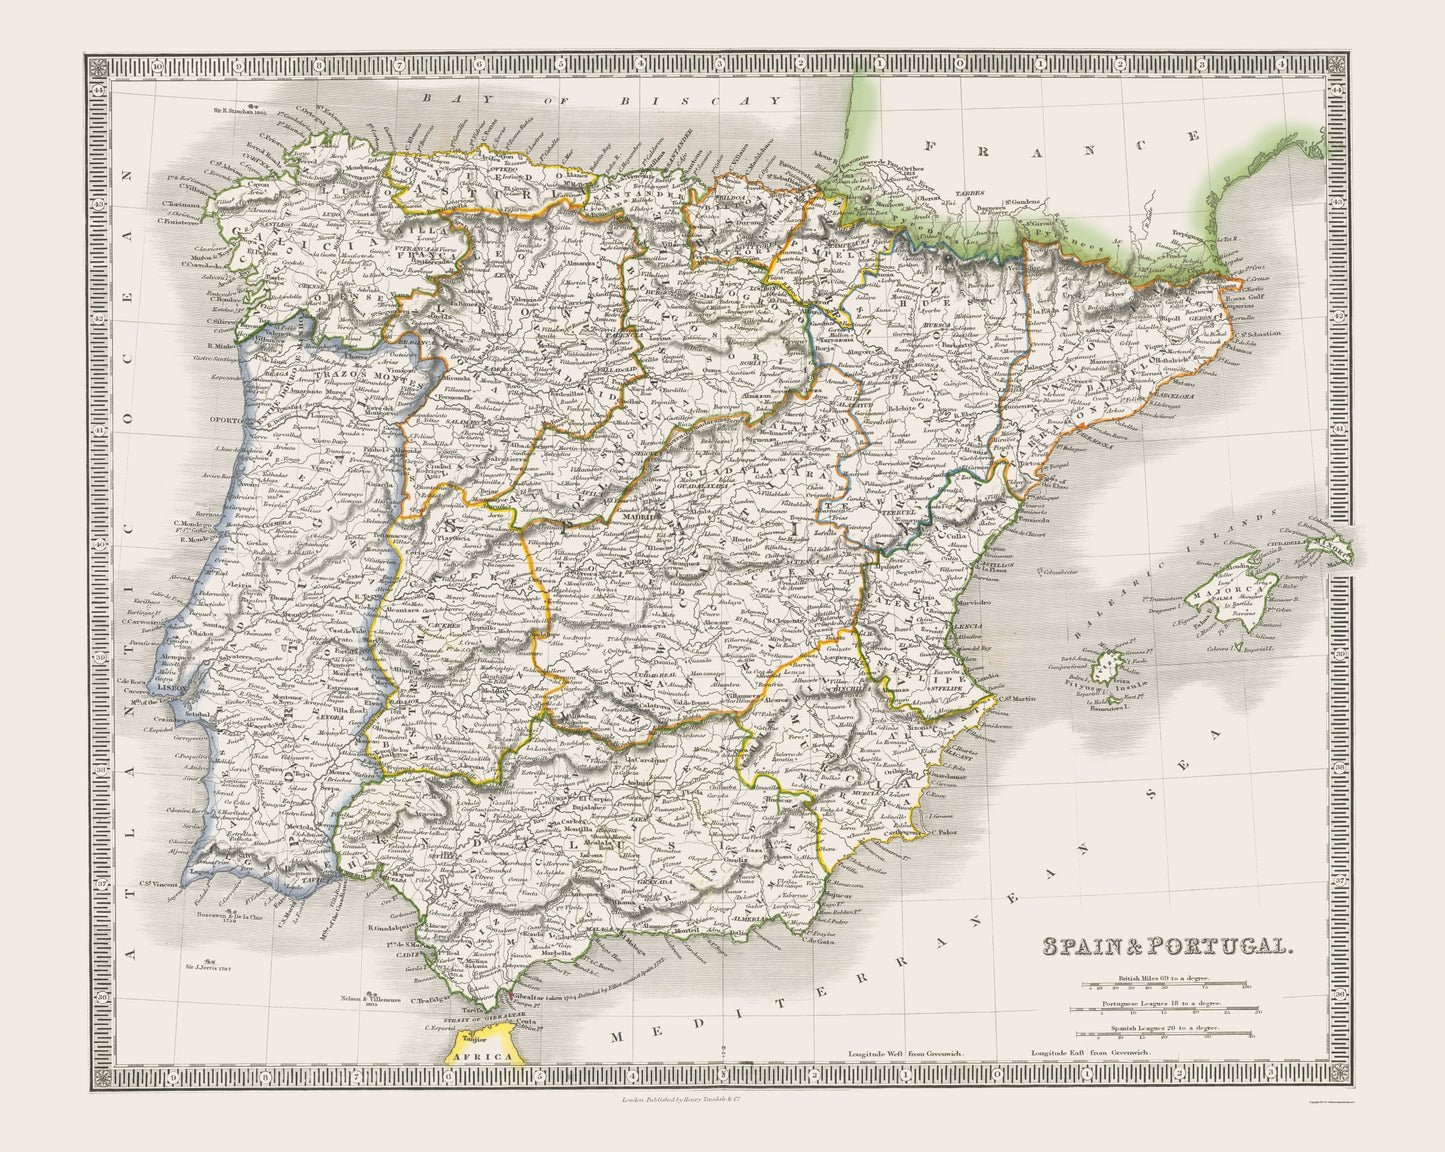 Historic Map - Spain Portugal - Dower 1844 - 23 x 28.84 - Vintage Wall Art